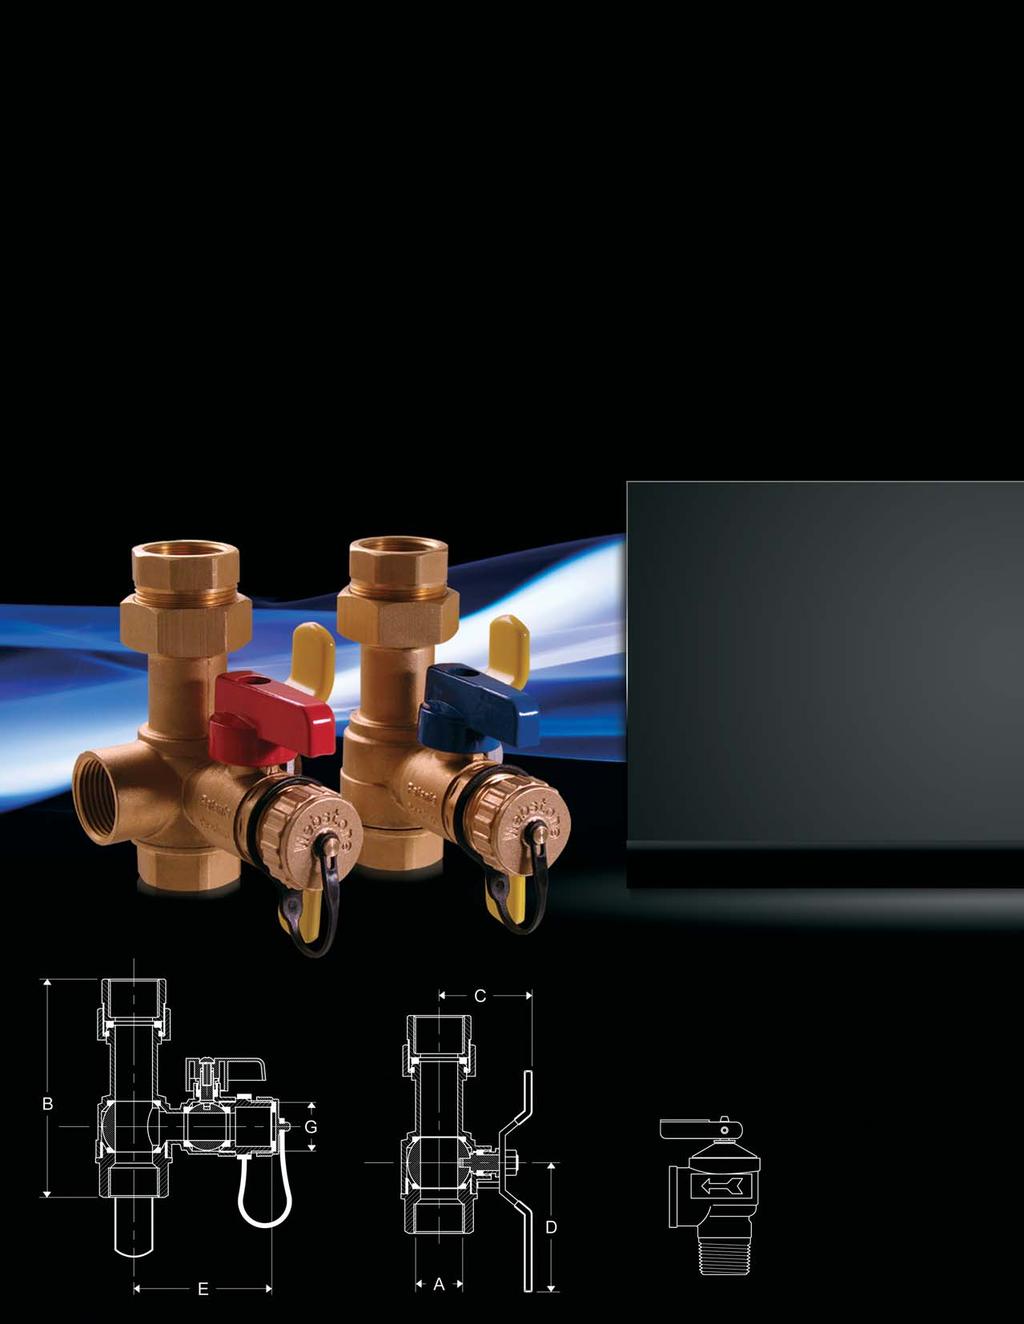 Heavy duty forged brass with full port main flow channel Performs all of the same functions of our original E-X-P Packaged with pressure relief valve for residential use (00,000 BTU) Uniquely